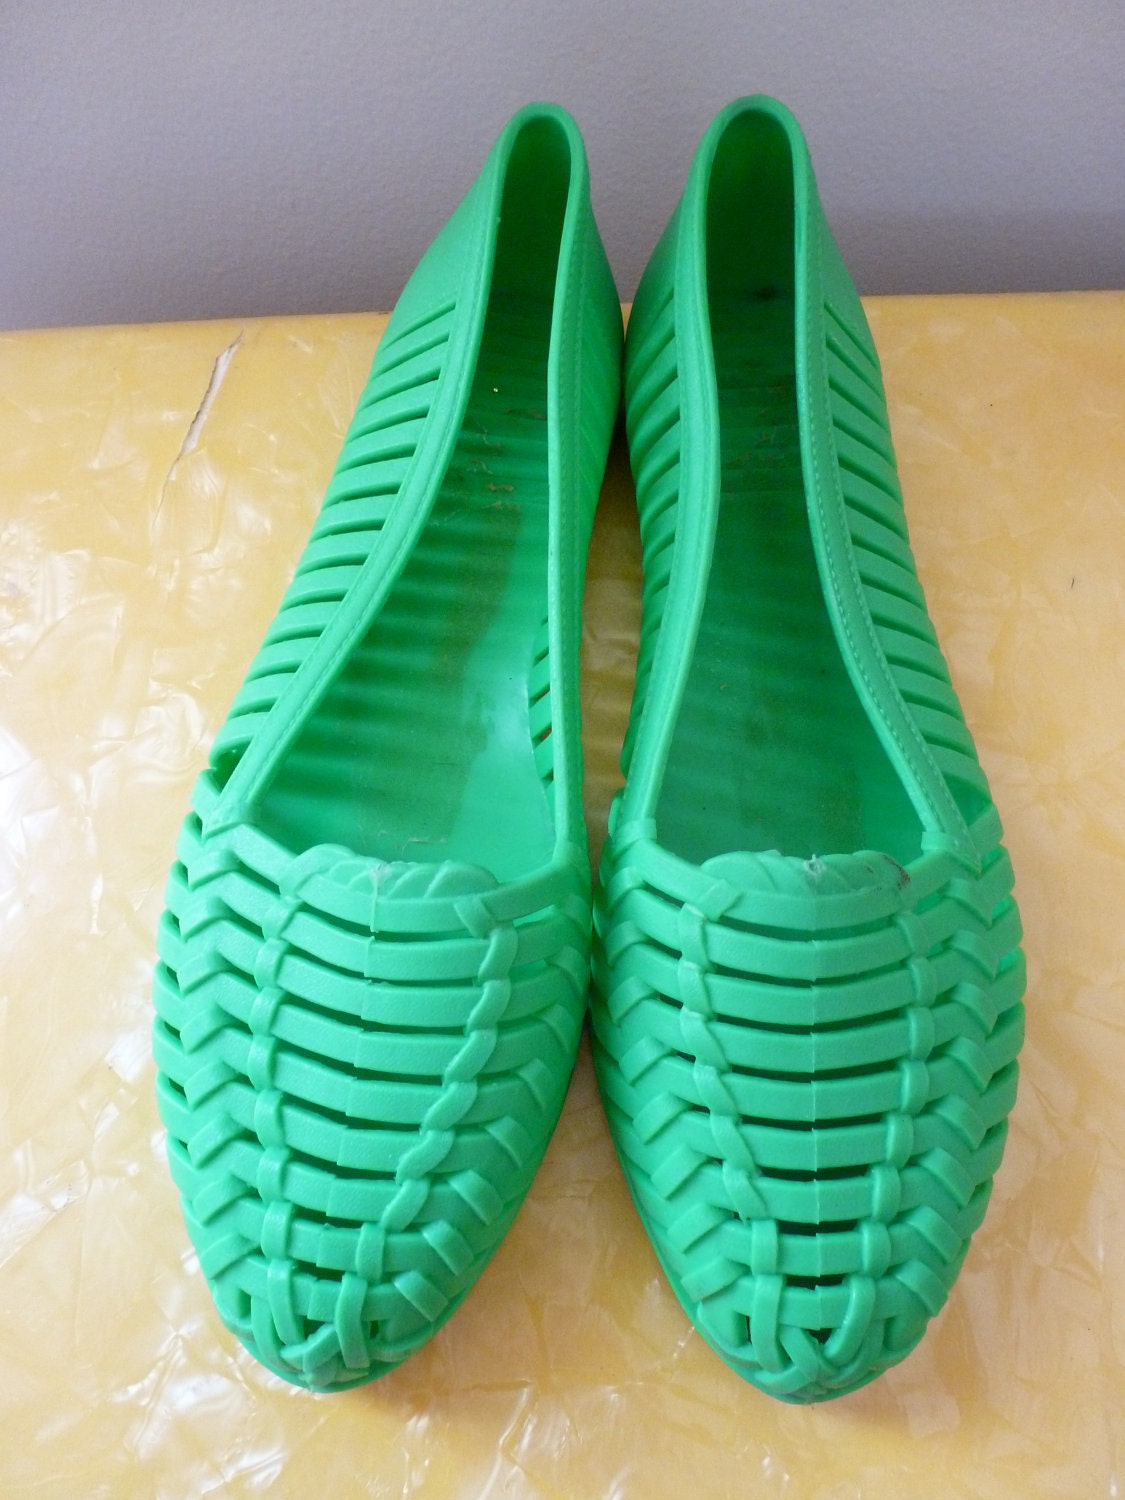 80's Jelly Shoes Neon Green Rubber Flats 8